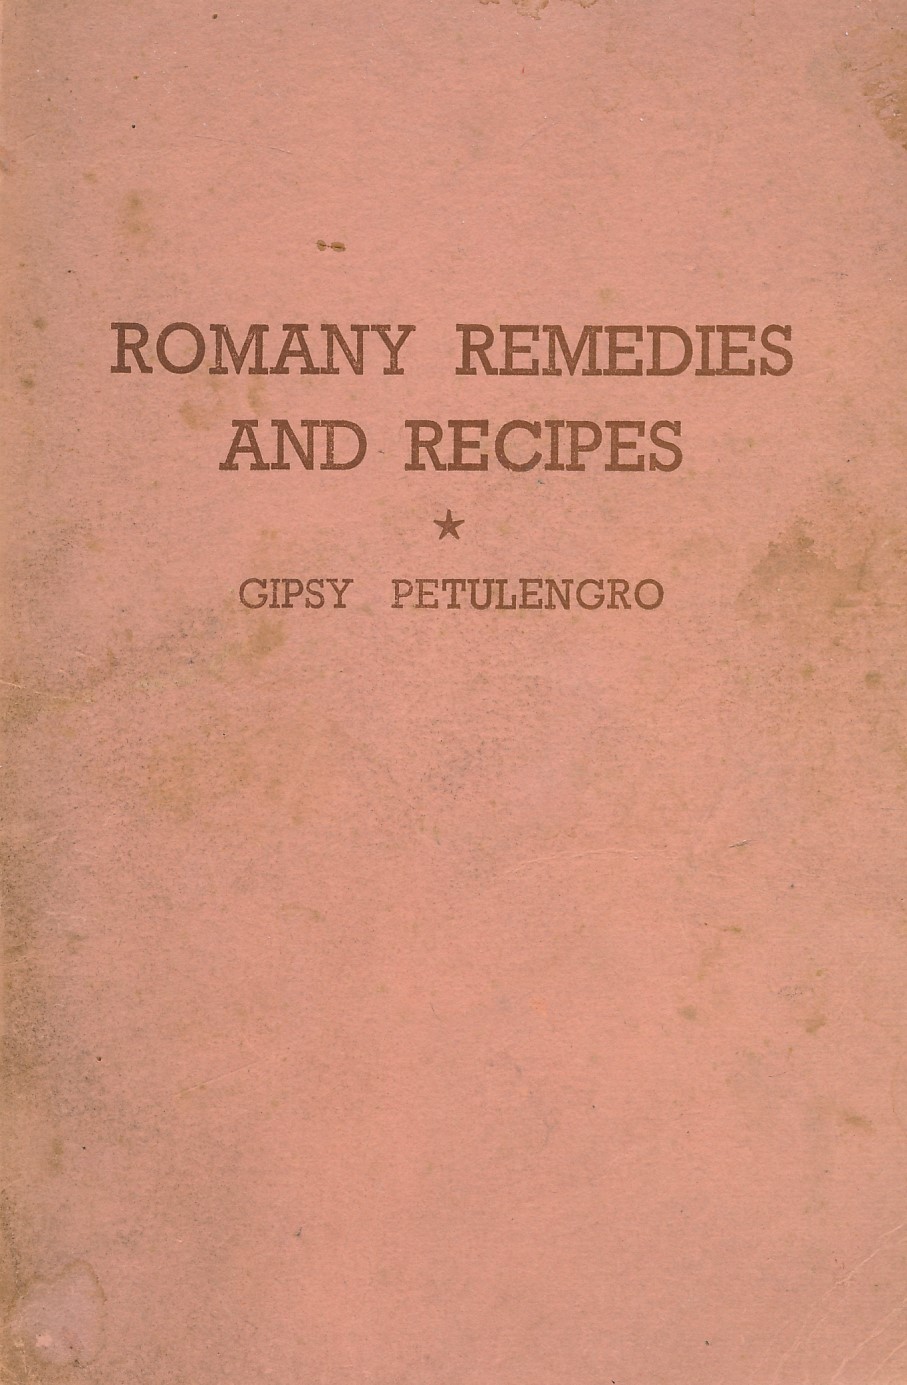 Romany Remedies and Recipes.